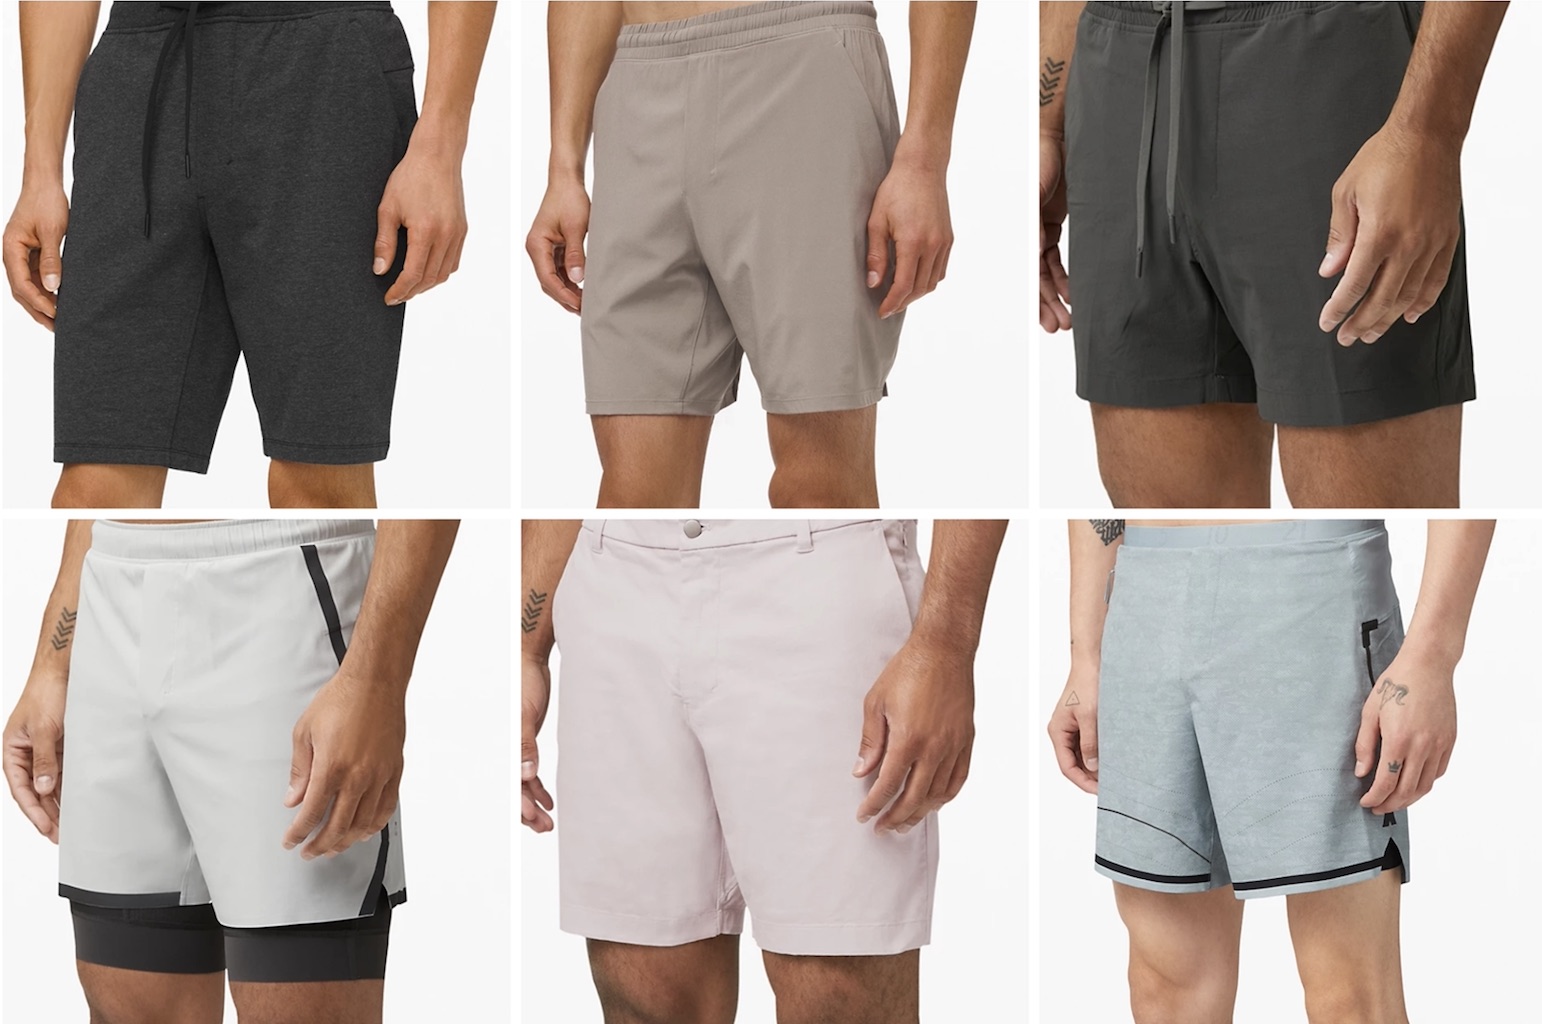 Lululemon Men's Shorts - Seriously Comfortable Shorts For The